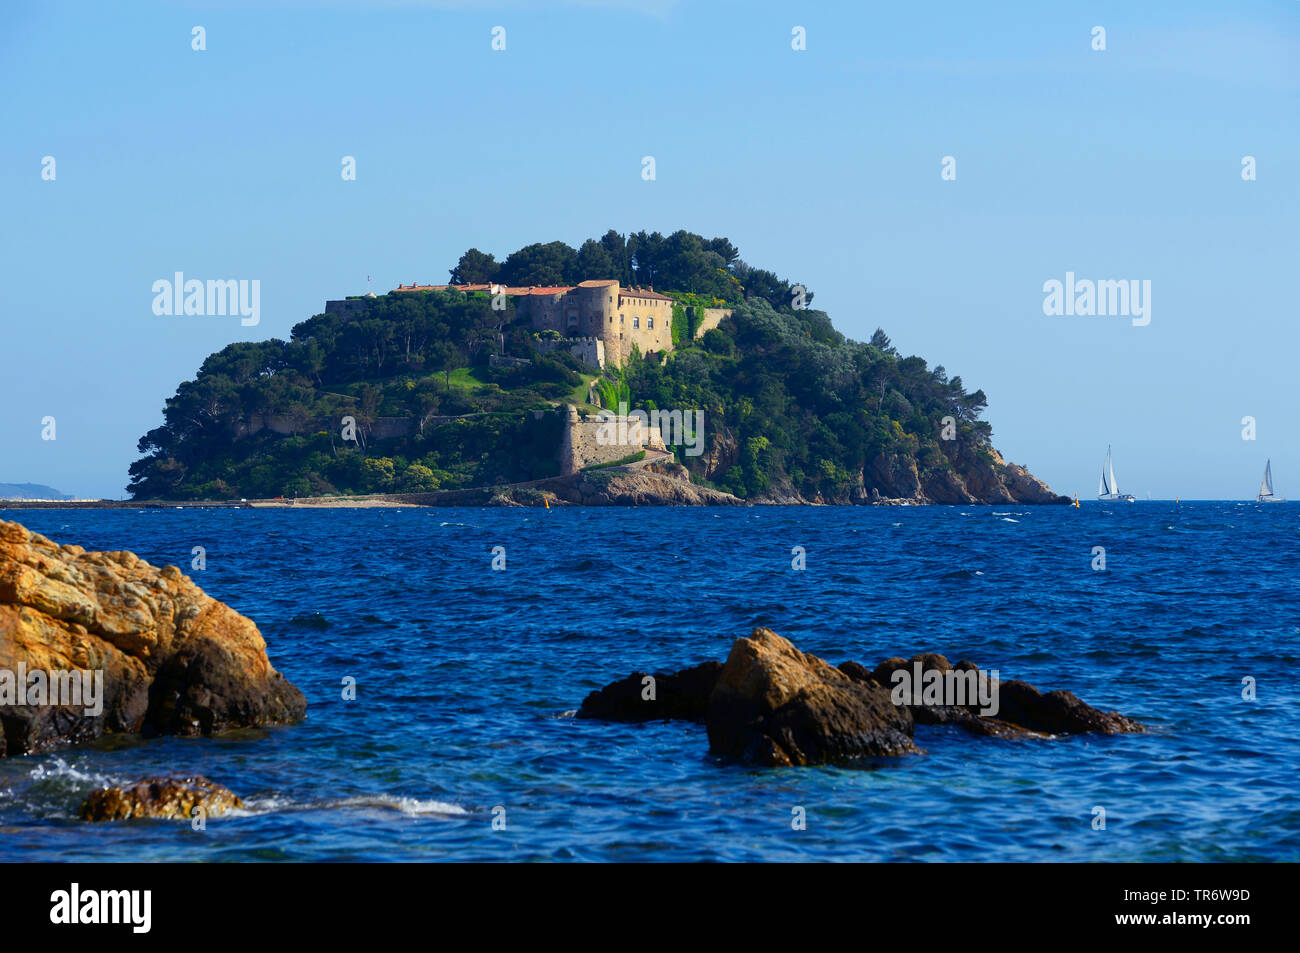 Fort de Bregancon, official retreat of the President of France, France, Toulon Stock Photo